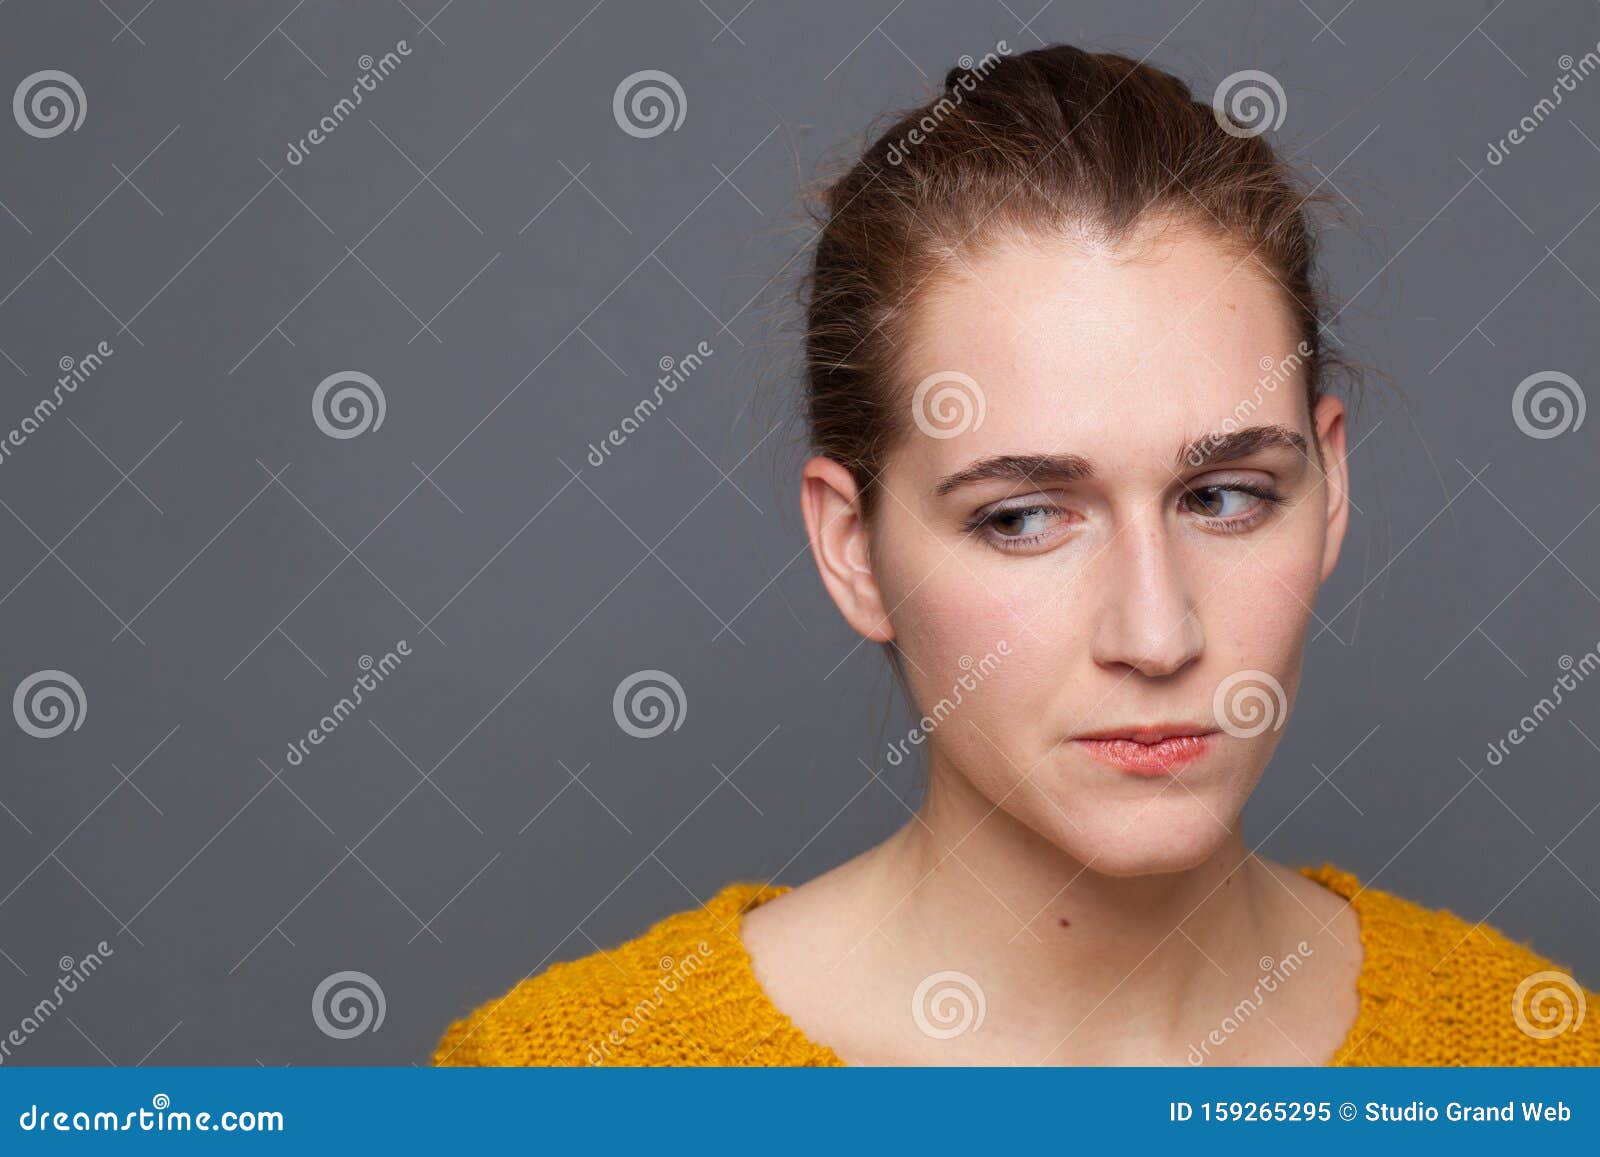 concerned young woman thinking, expressing doubt, insecurity, suspicion or distrust